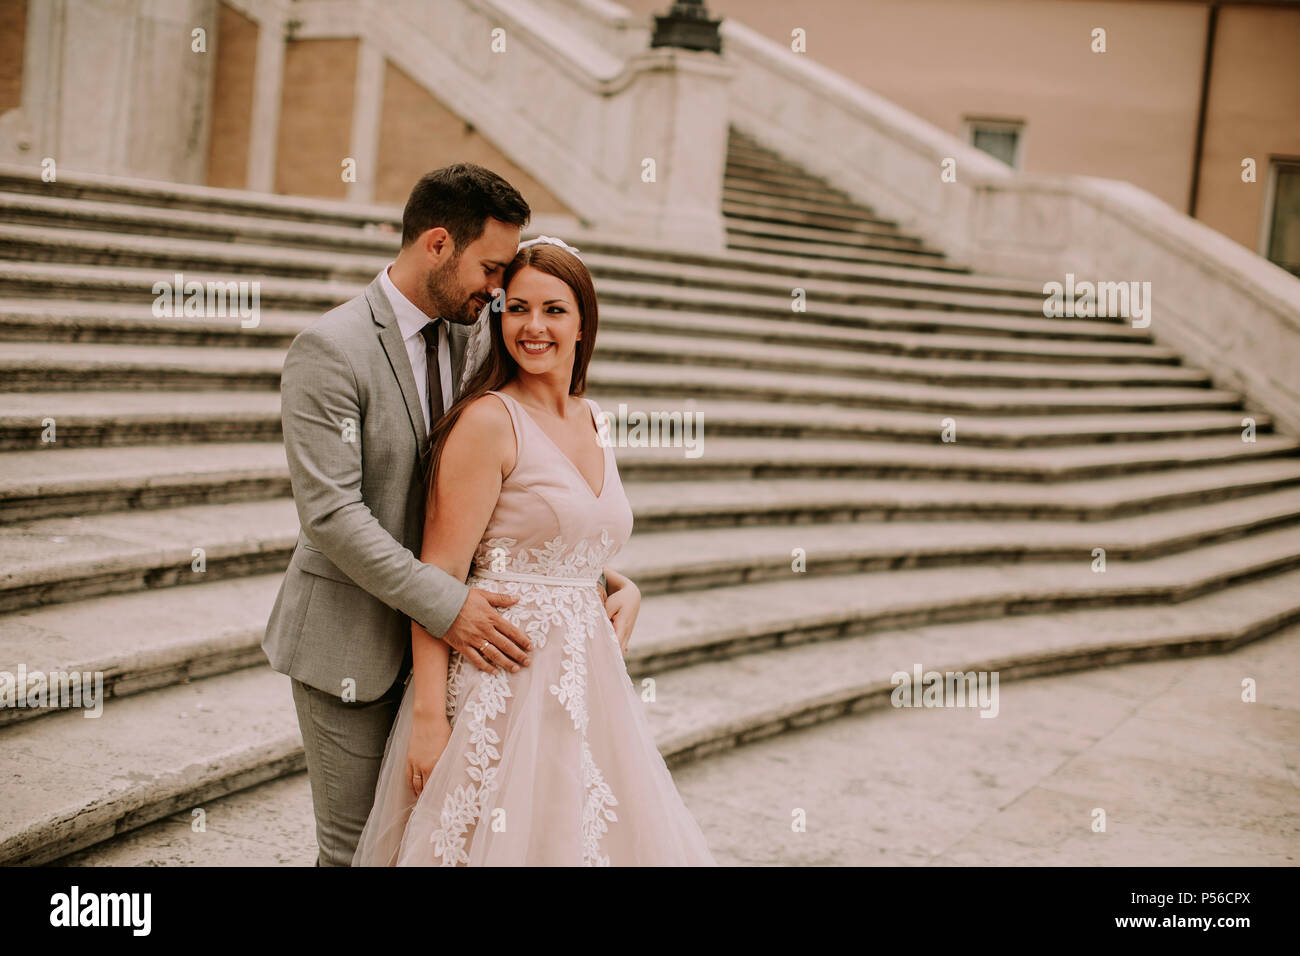 Young wedding couple on Spanish stairs in Rome, Italy Stock Photo